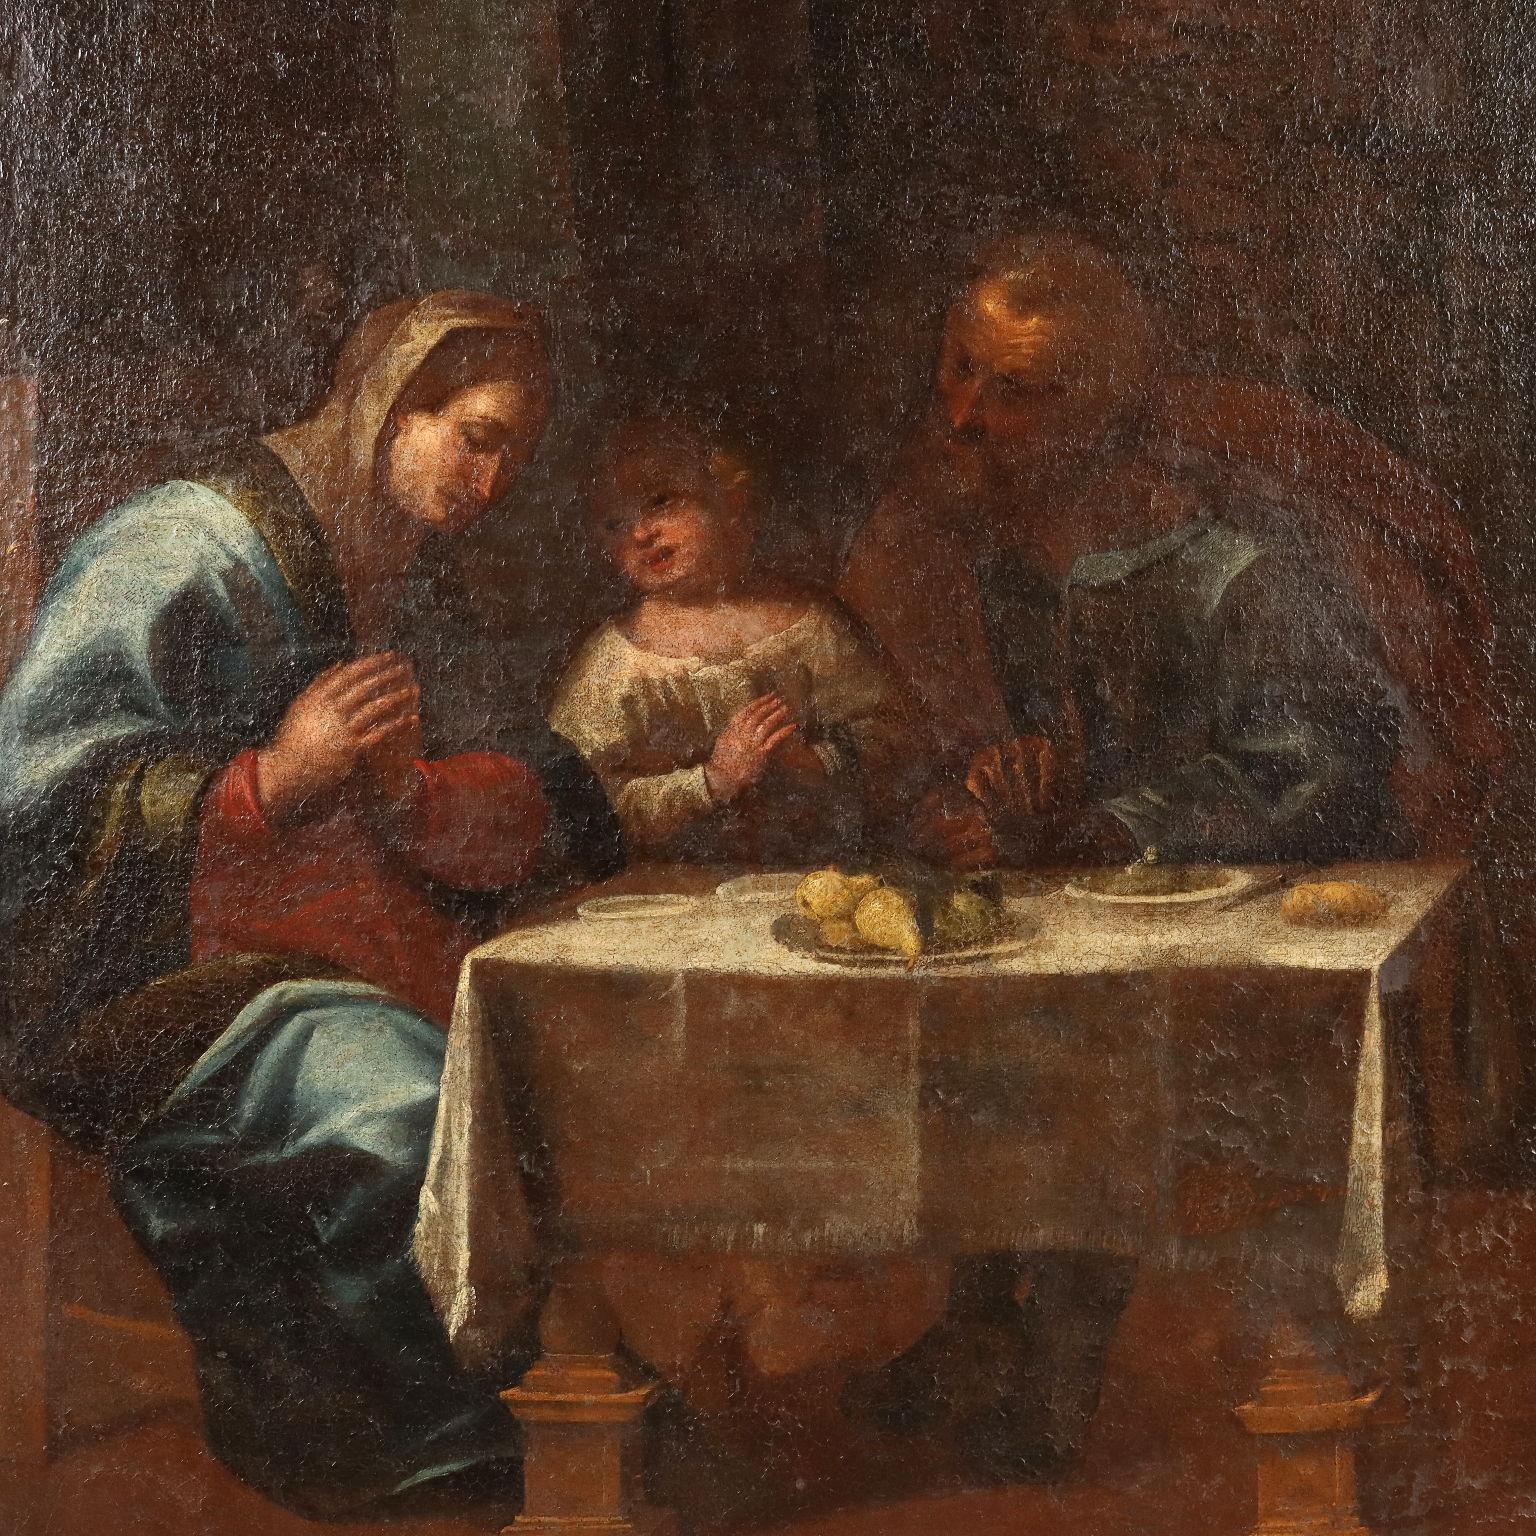 Dipinto con La Sacra Famiglia a Tavola - Other Art Style Painting by Unknown